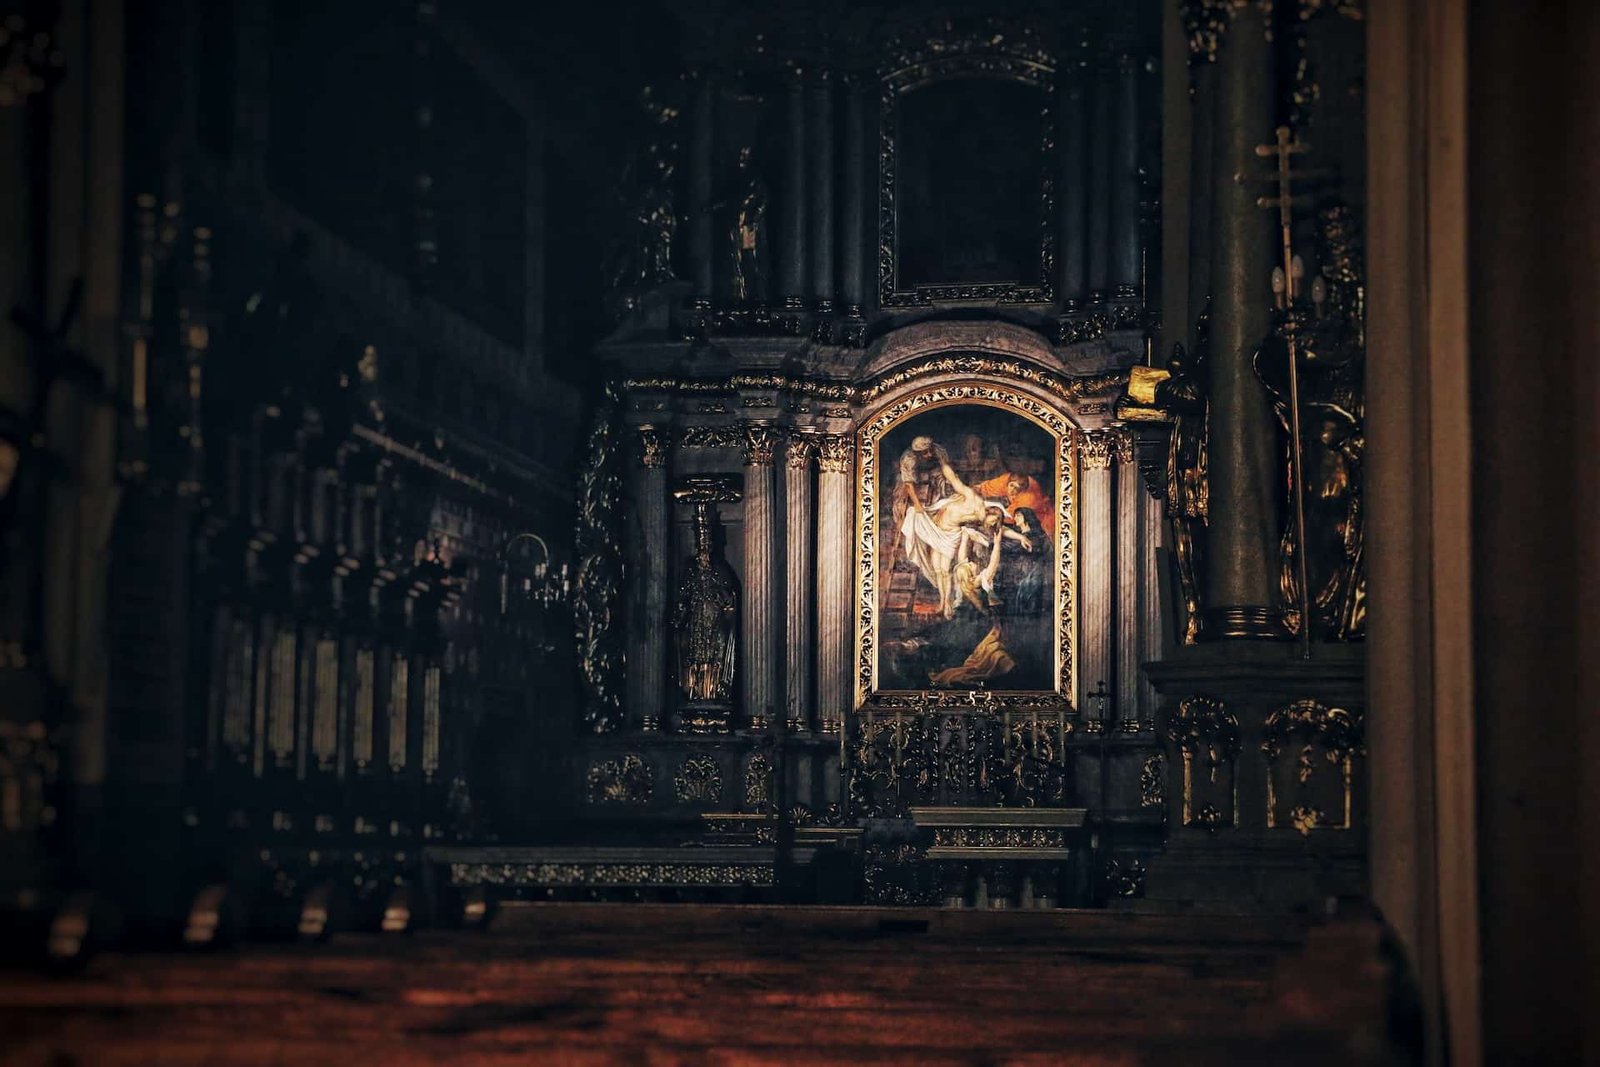 photograph of Christian painting inside of cathedral